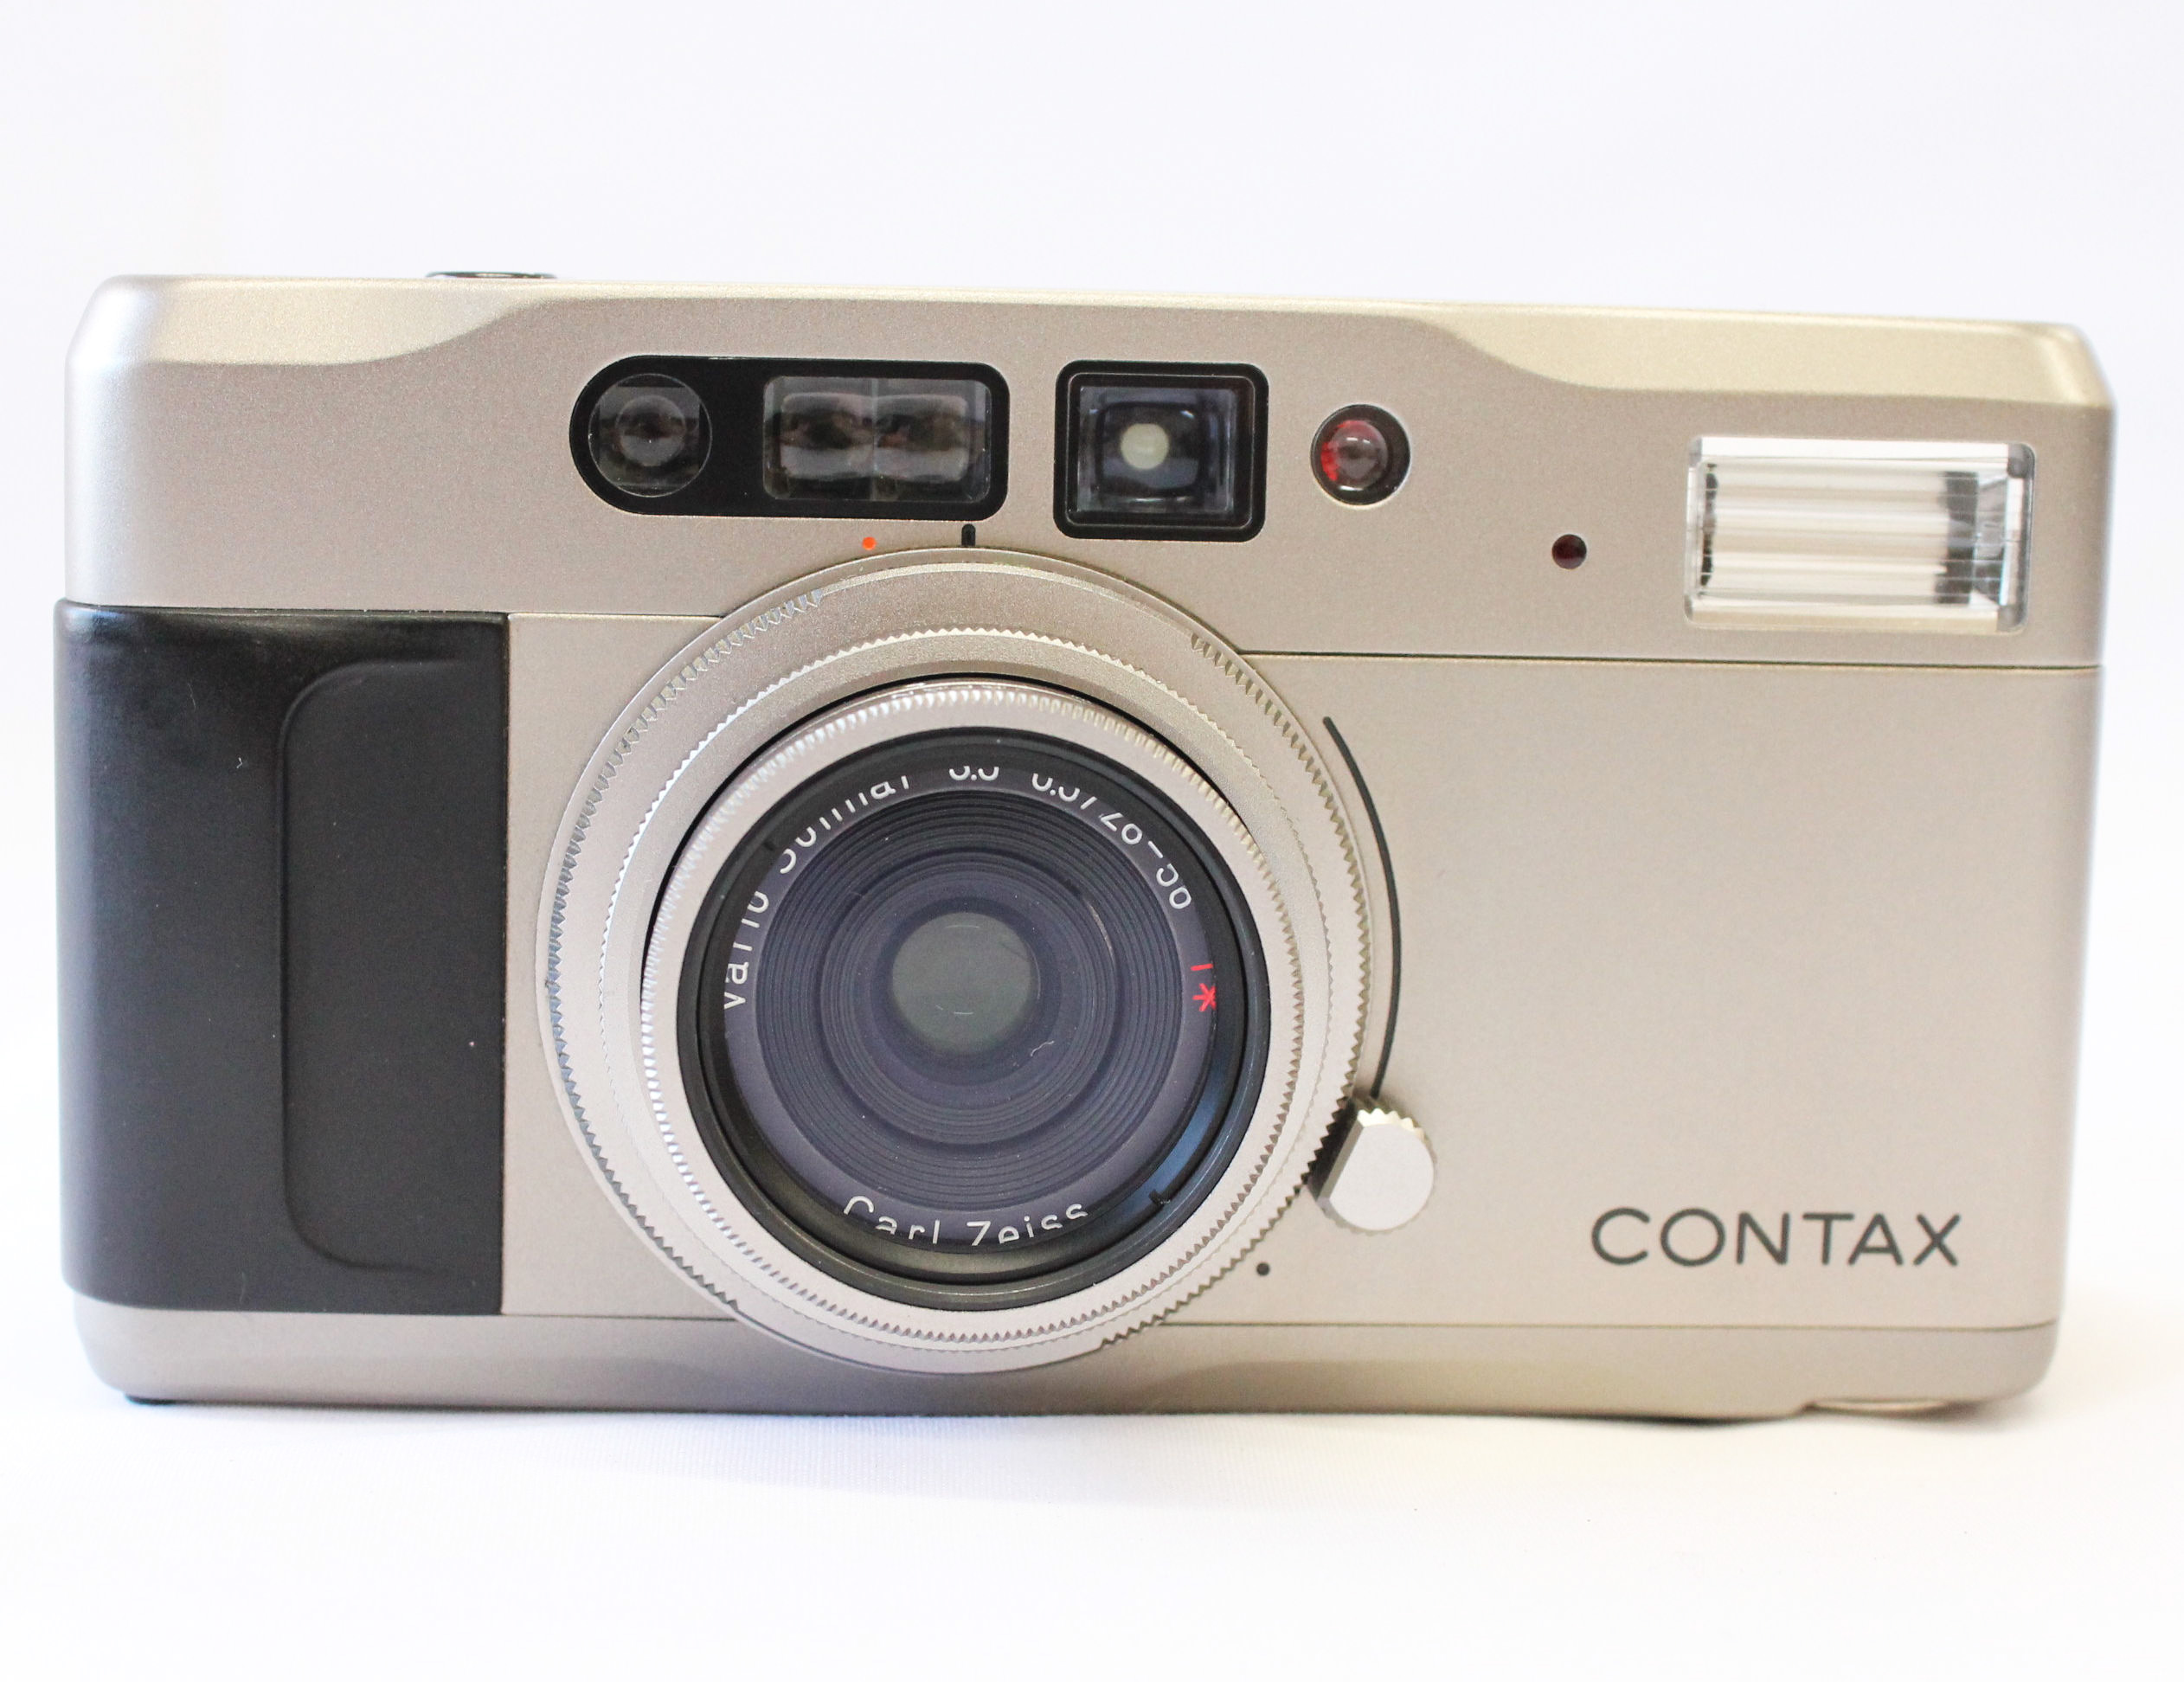  Contax TVS 35mm Point & Shoot Film Camera w/ Data Back from Japan Photo 2